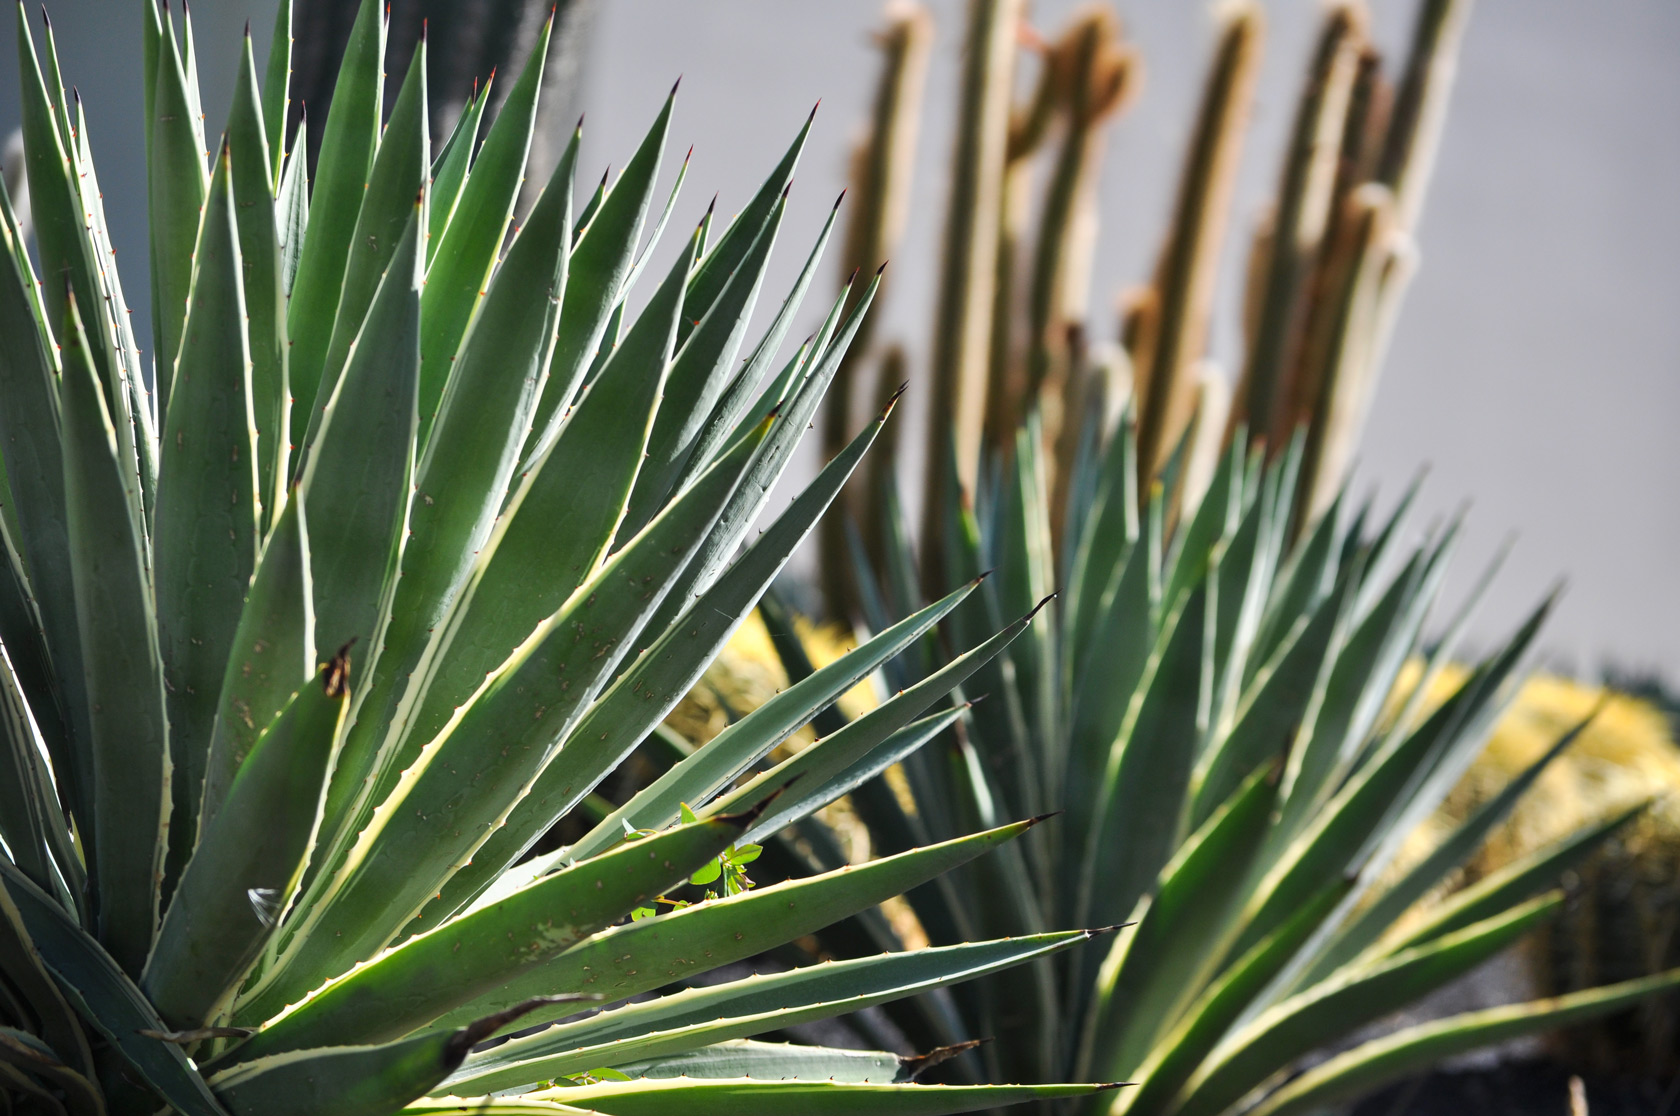 Two Caribbean Agave specimens.